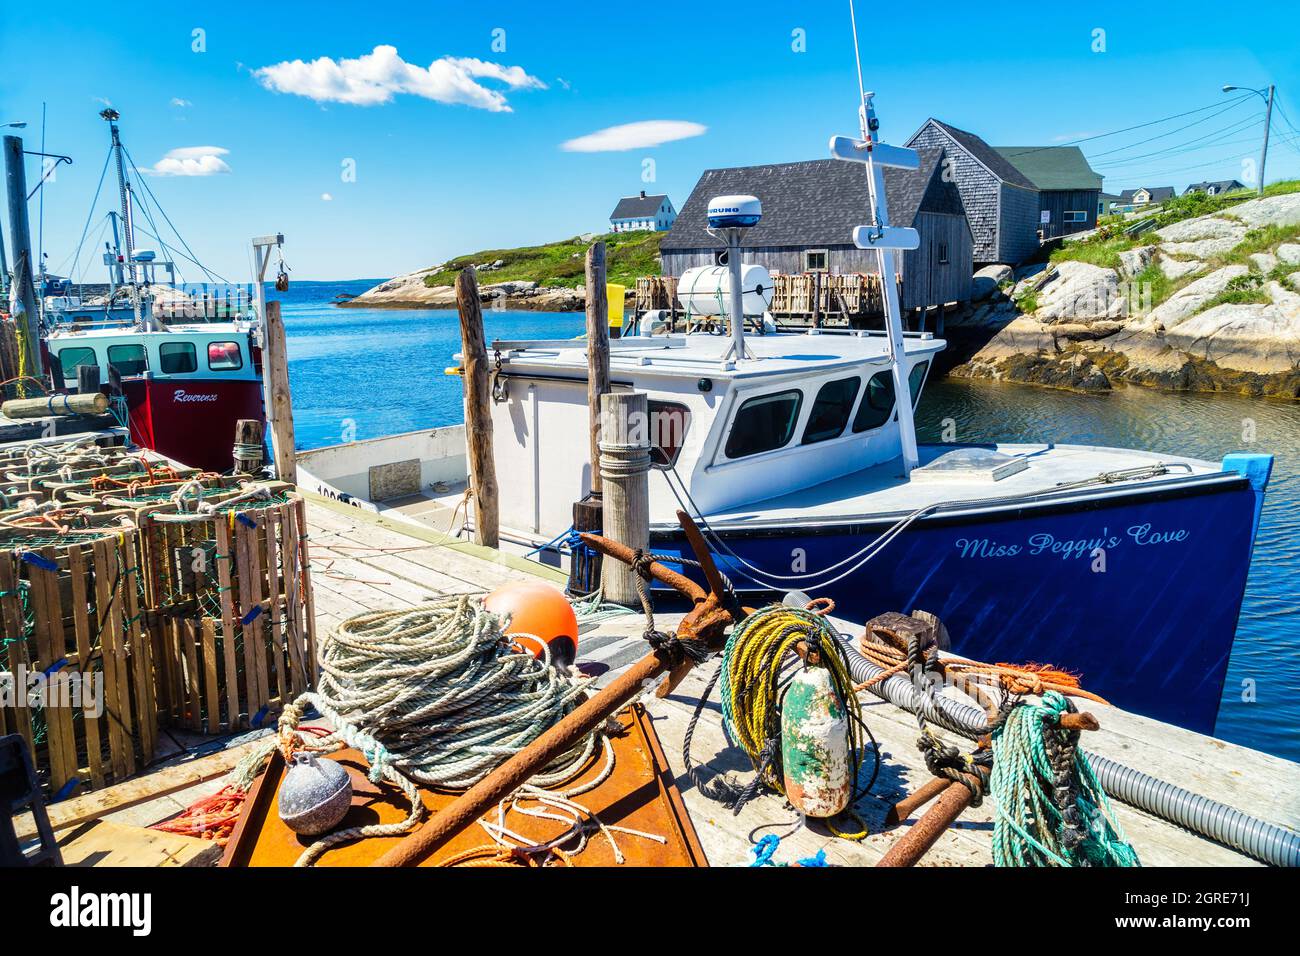 Fishing boat 'Miss Peggy's Cove' tied up at the wharf in Peggy's Cove, Nova Scotia, Canada. Stock Photo